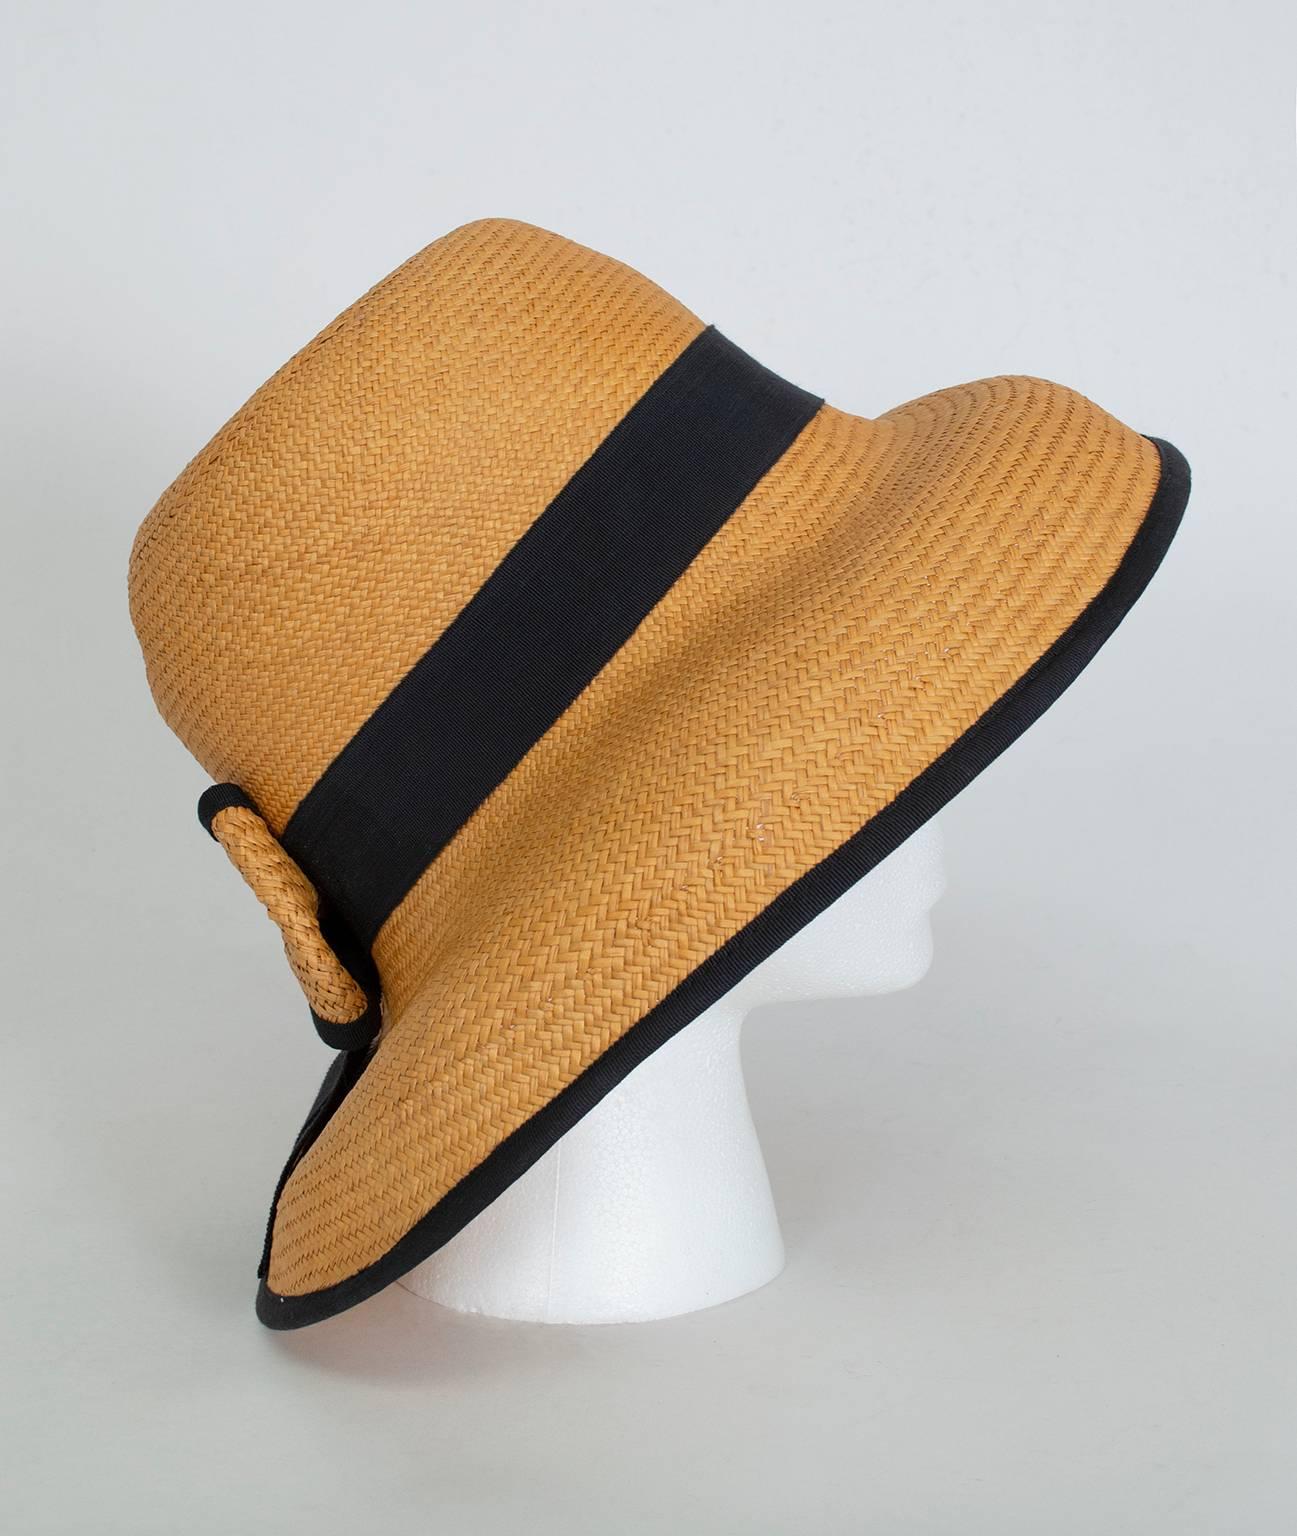 Breezy but still polished, bucket hats are a chic way to complete an outfit, frame your face and avoid UV radiation. We love the sportiness that the black grosgrain trim imparts to this beautiful example...right down to the rear straw bow!

Straw